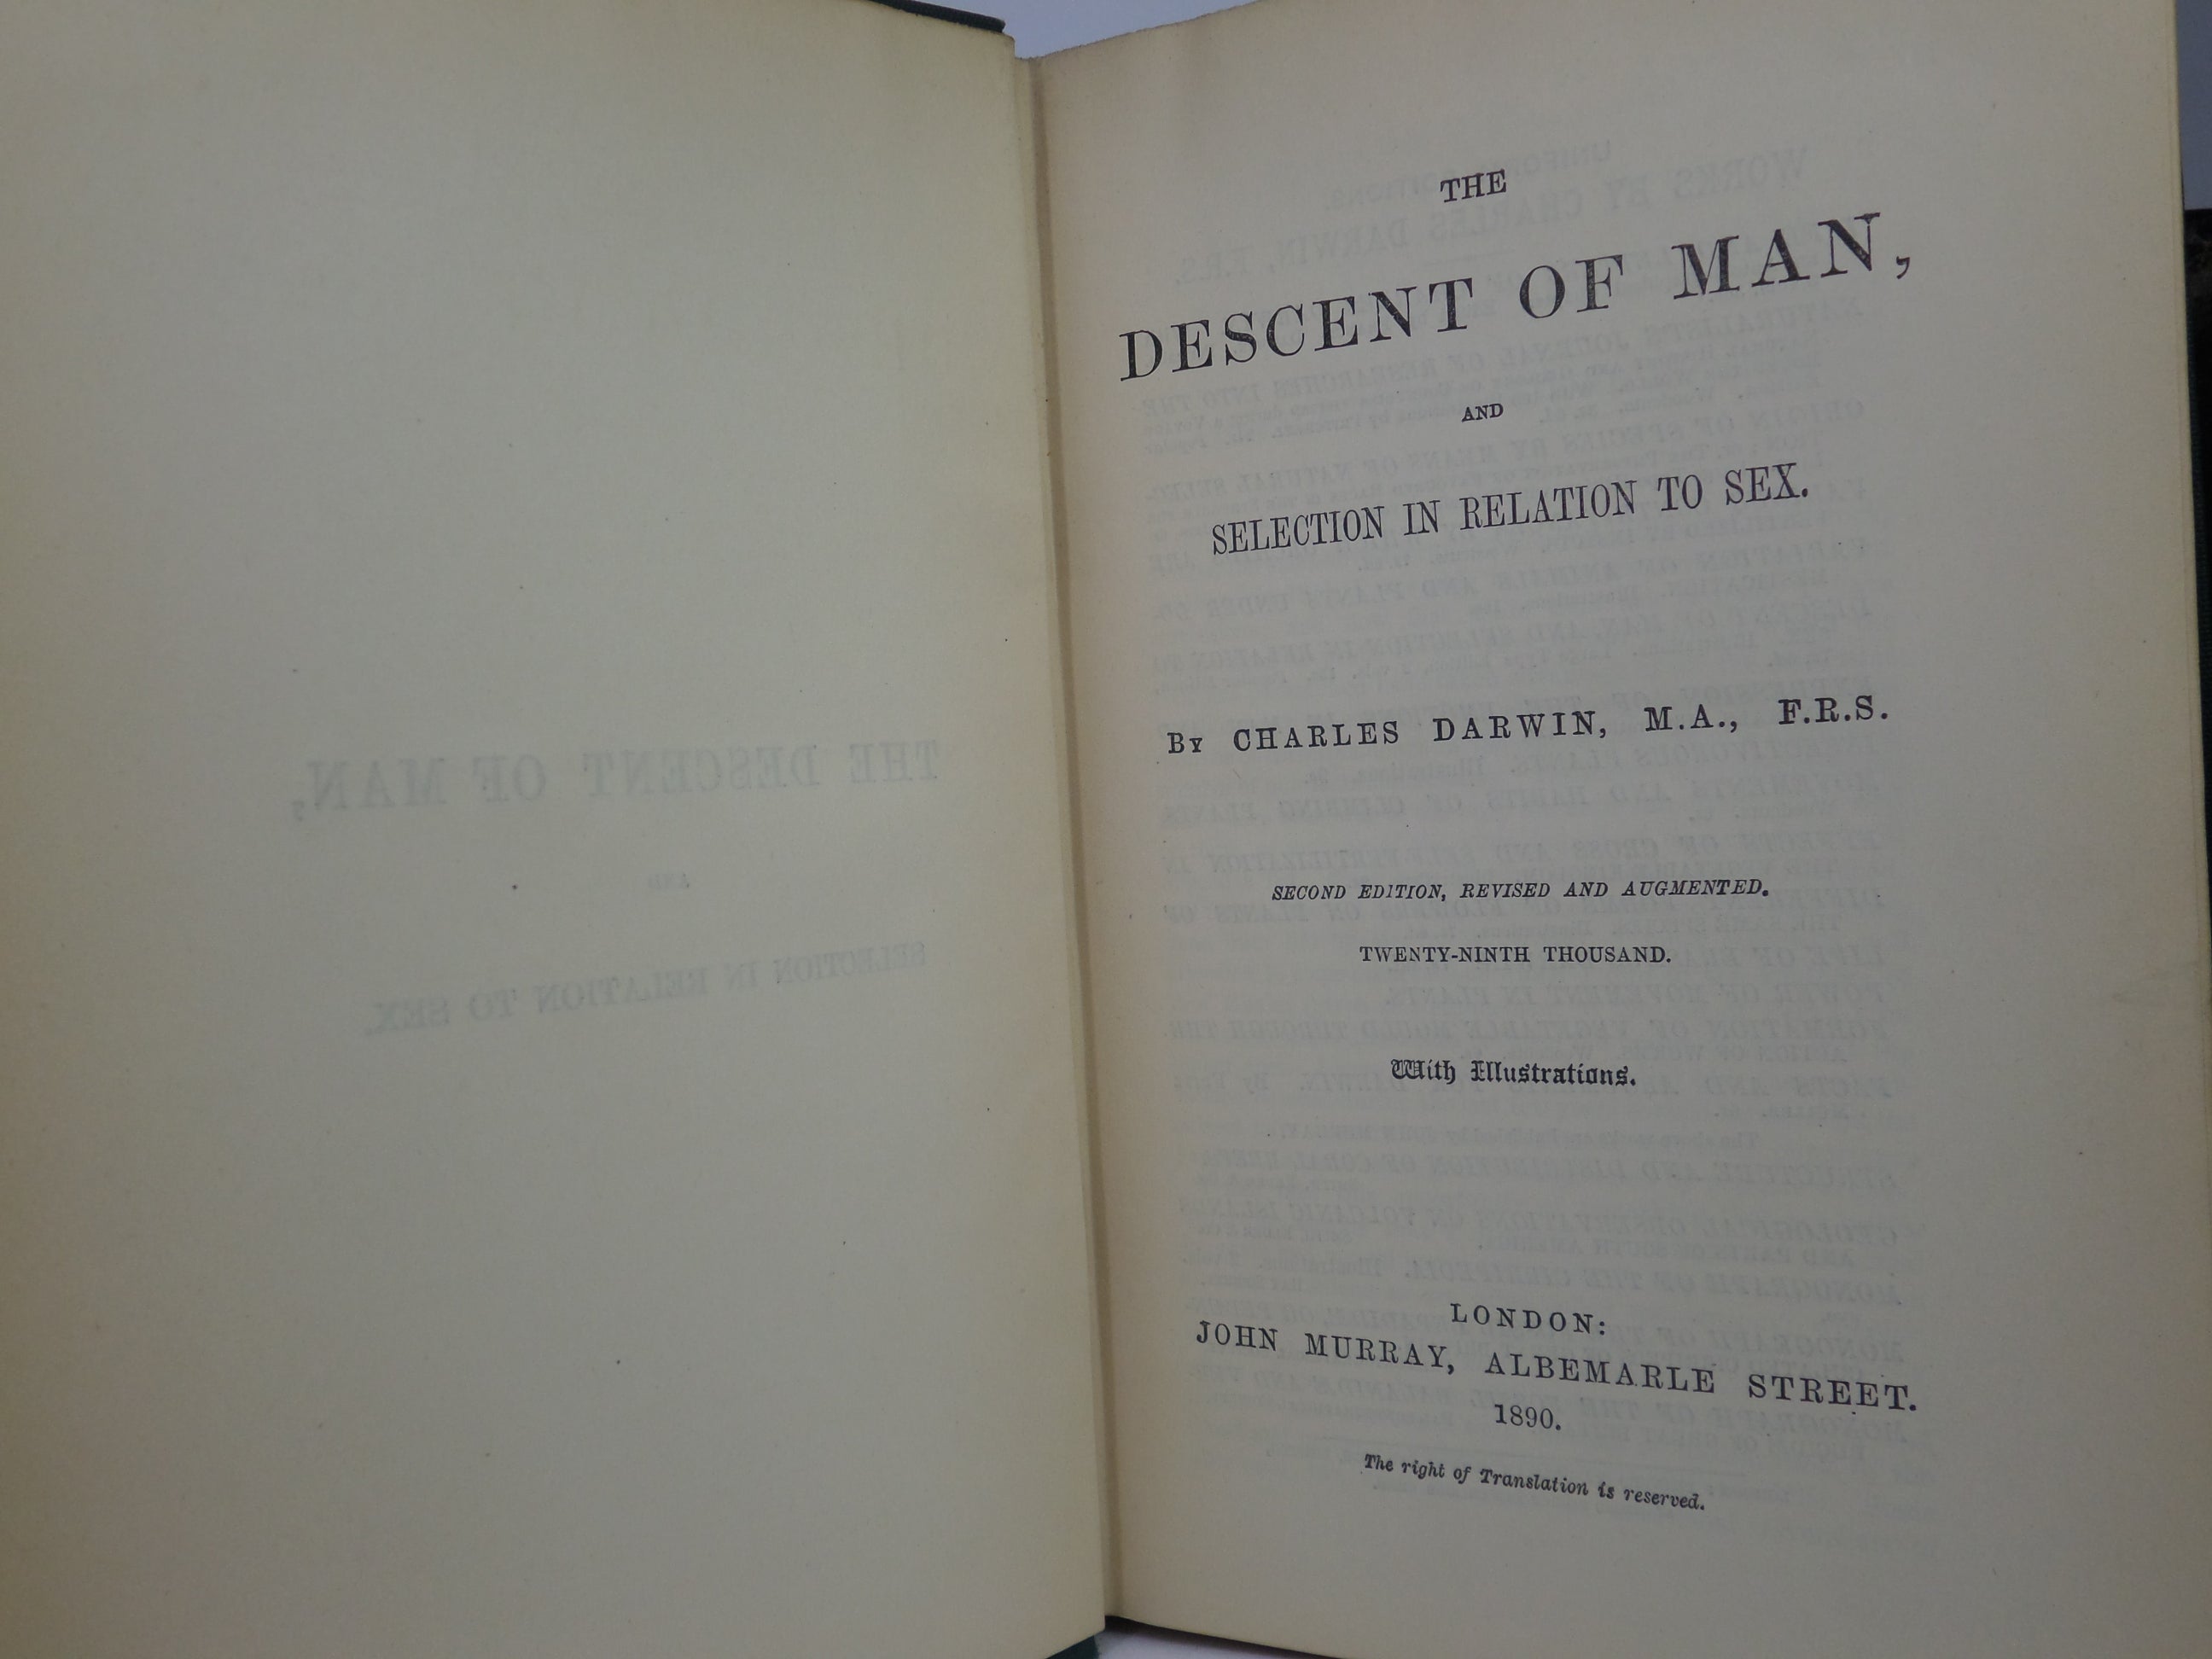 THE DESCENT OF MAN BY CHARLES DARWIN 1890